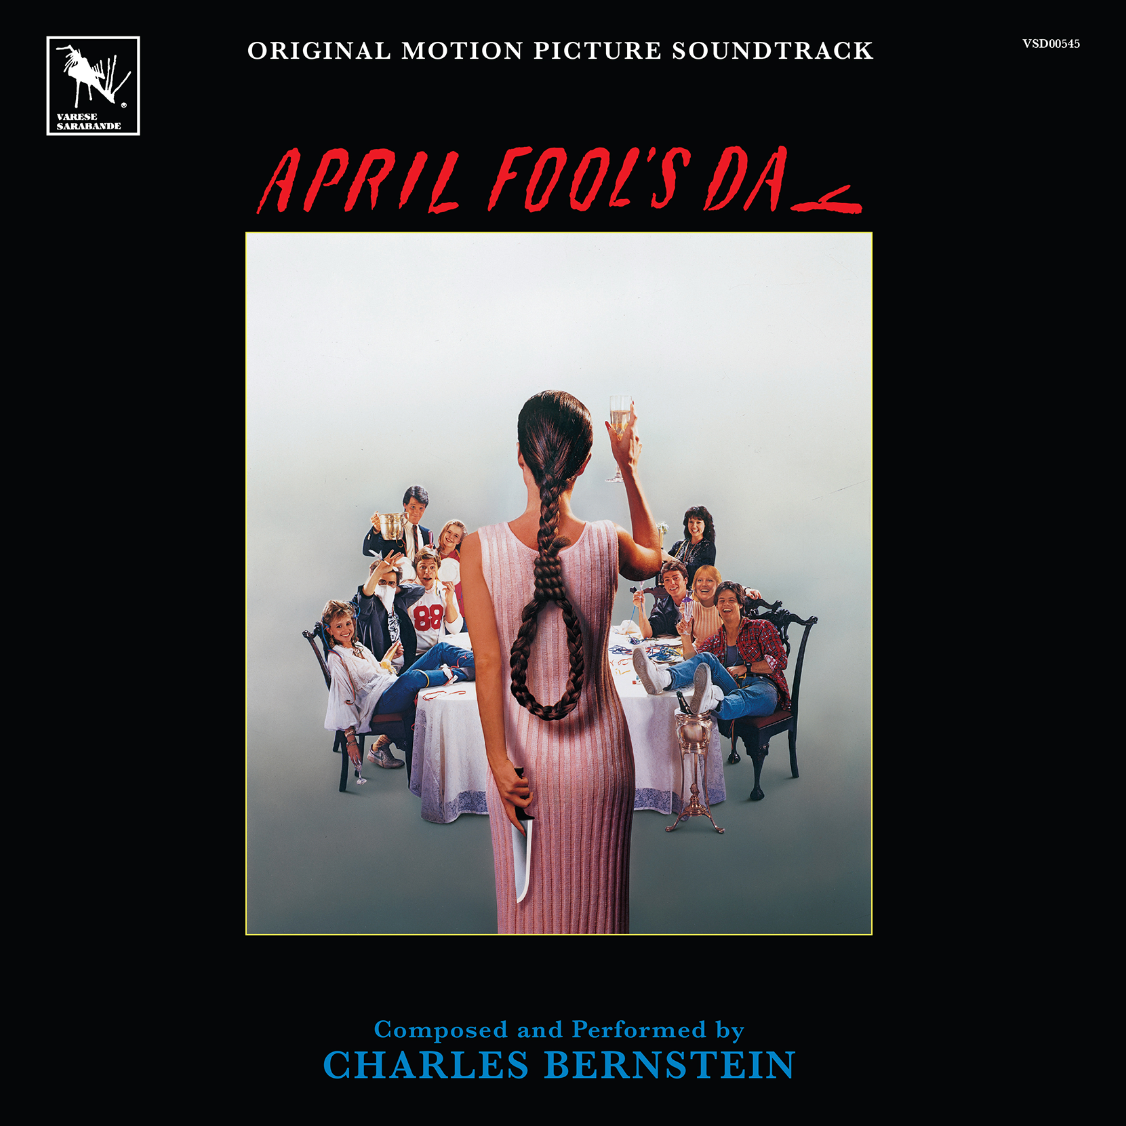 CHARLES BERNSTEIN'S SCORE FOR CULT-CLASSIC '80s SLASHER APRIL FOOL'S DAY  GETS 2-LP DELUXE EXPANSION – Craft Recordings